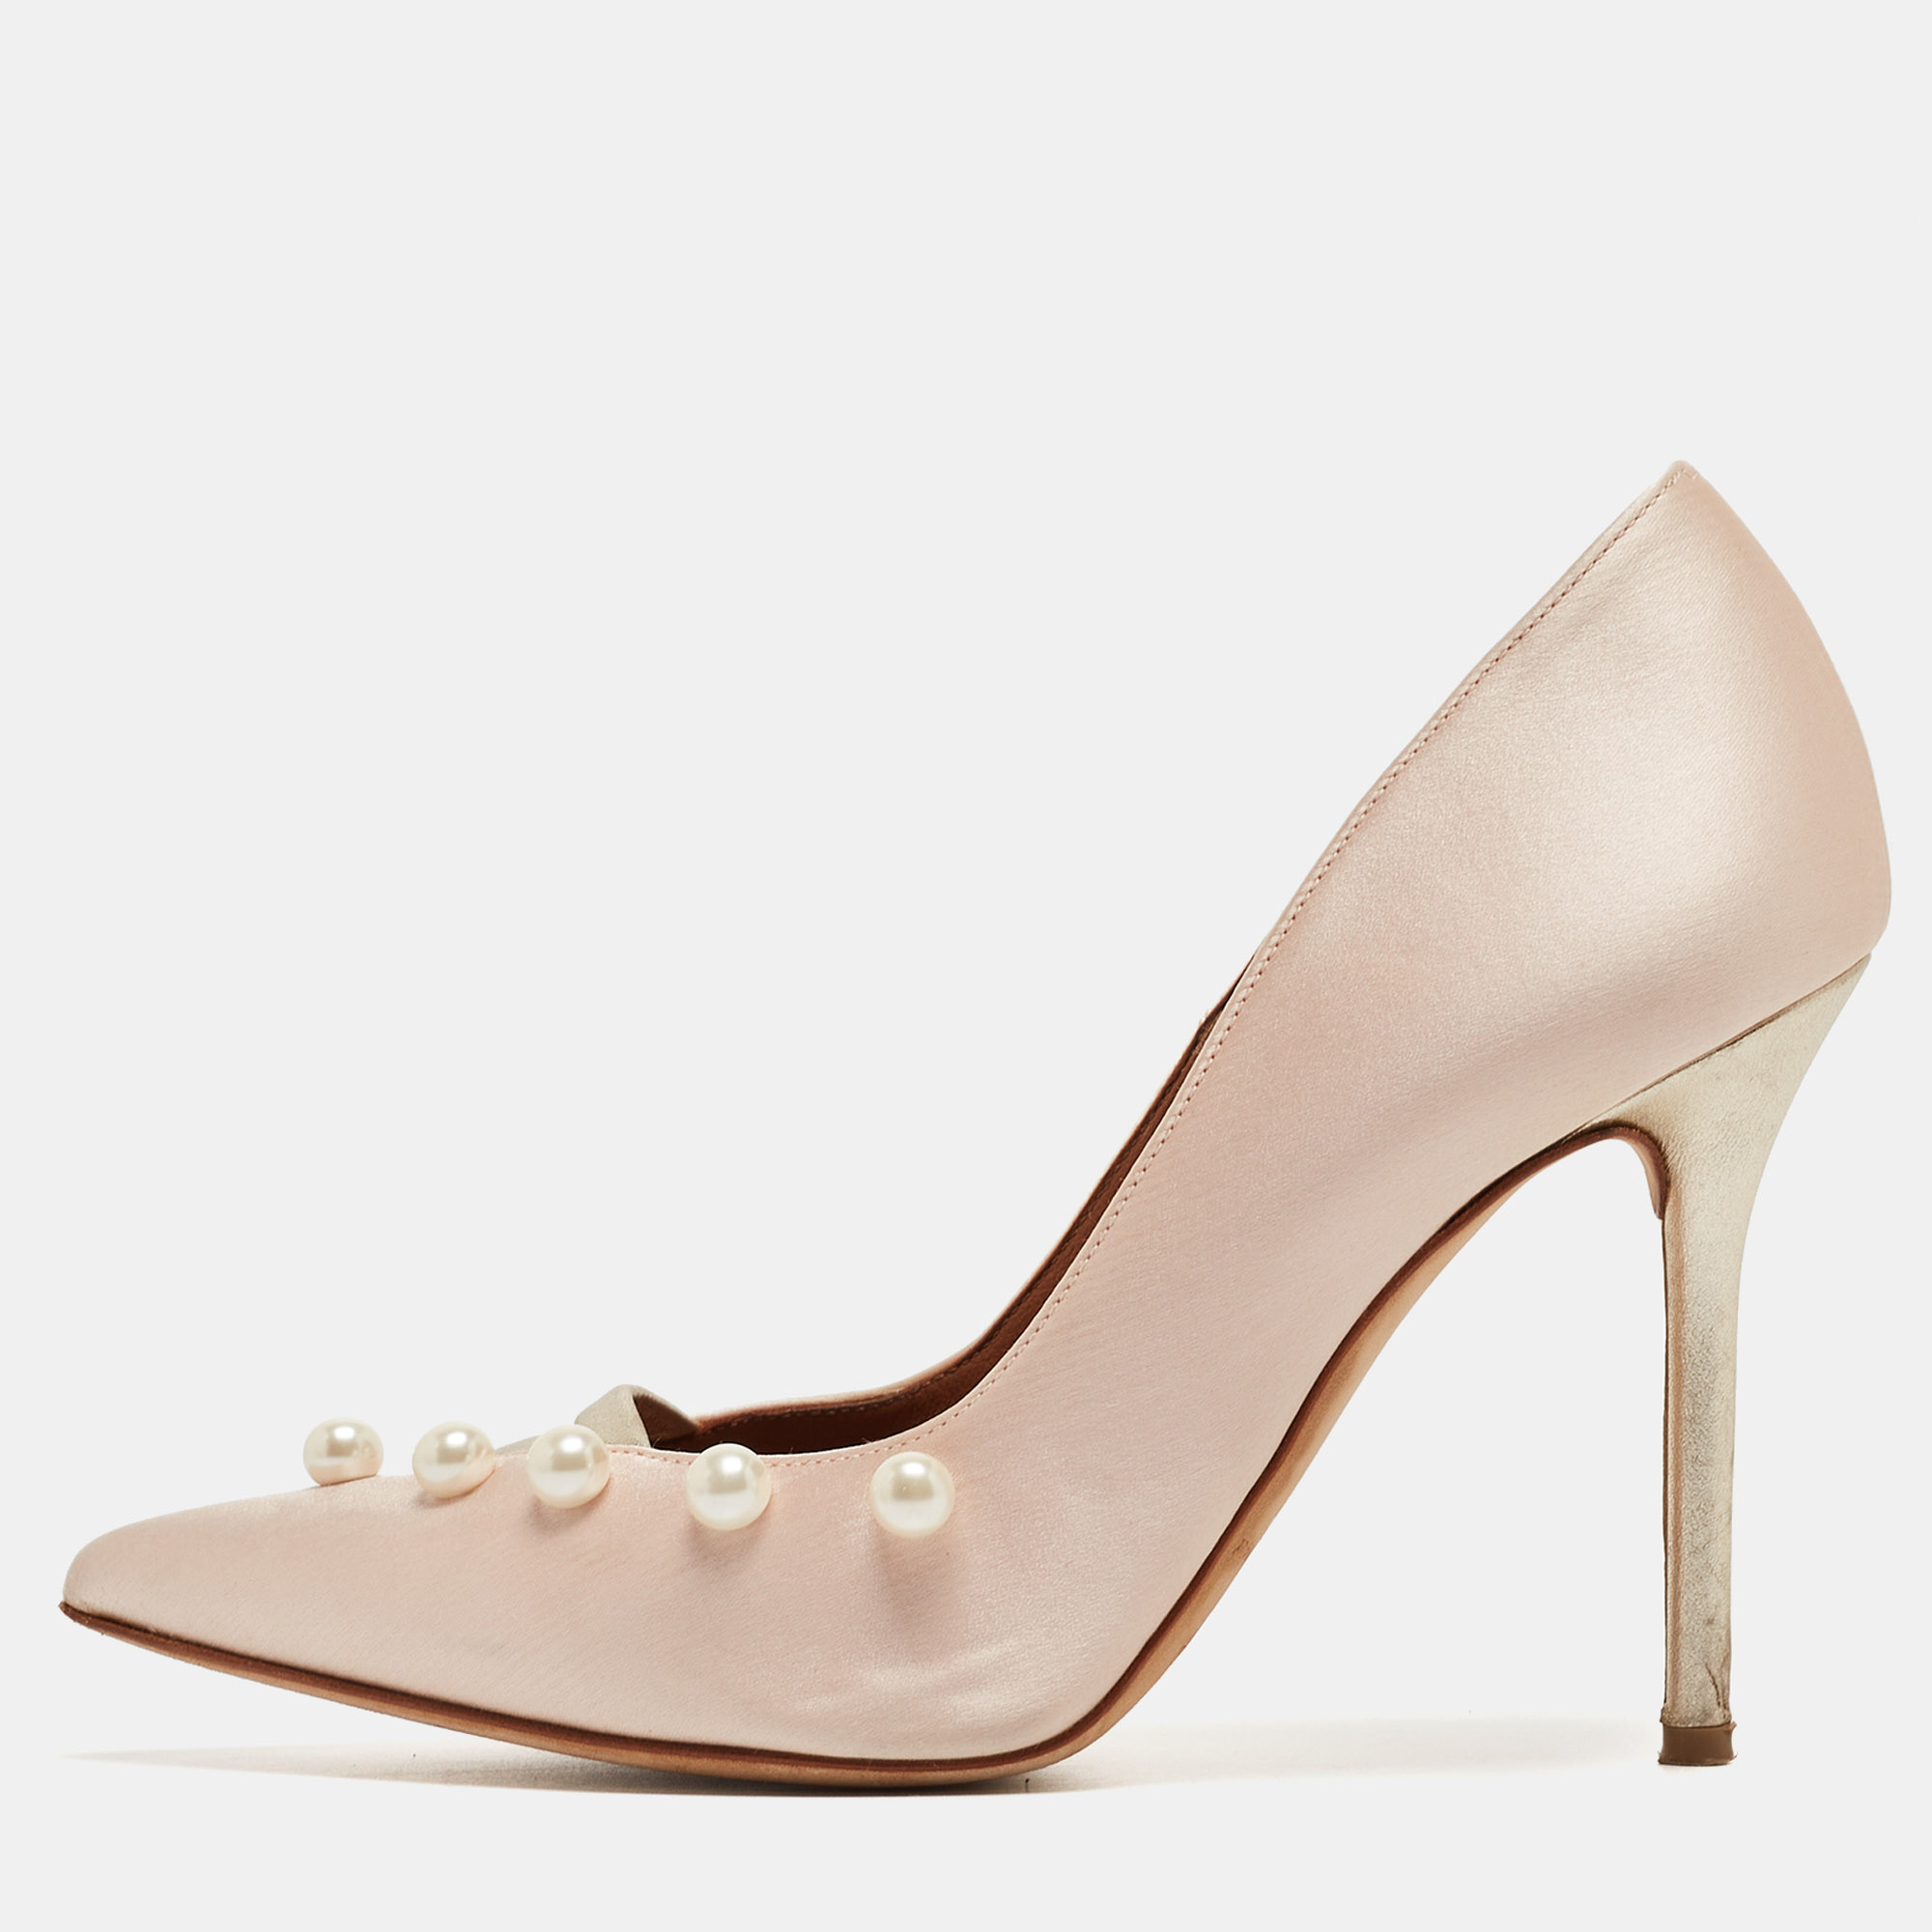 Malone souliers pink satin pearl embellished zia pumps size 37.5